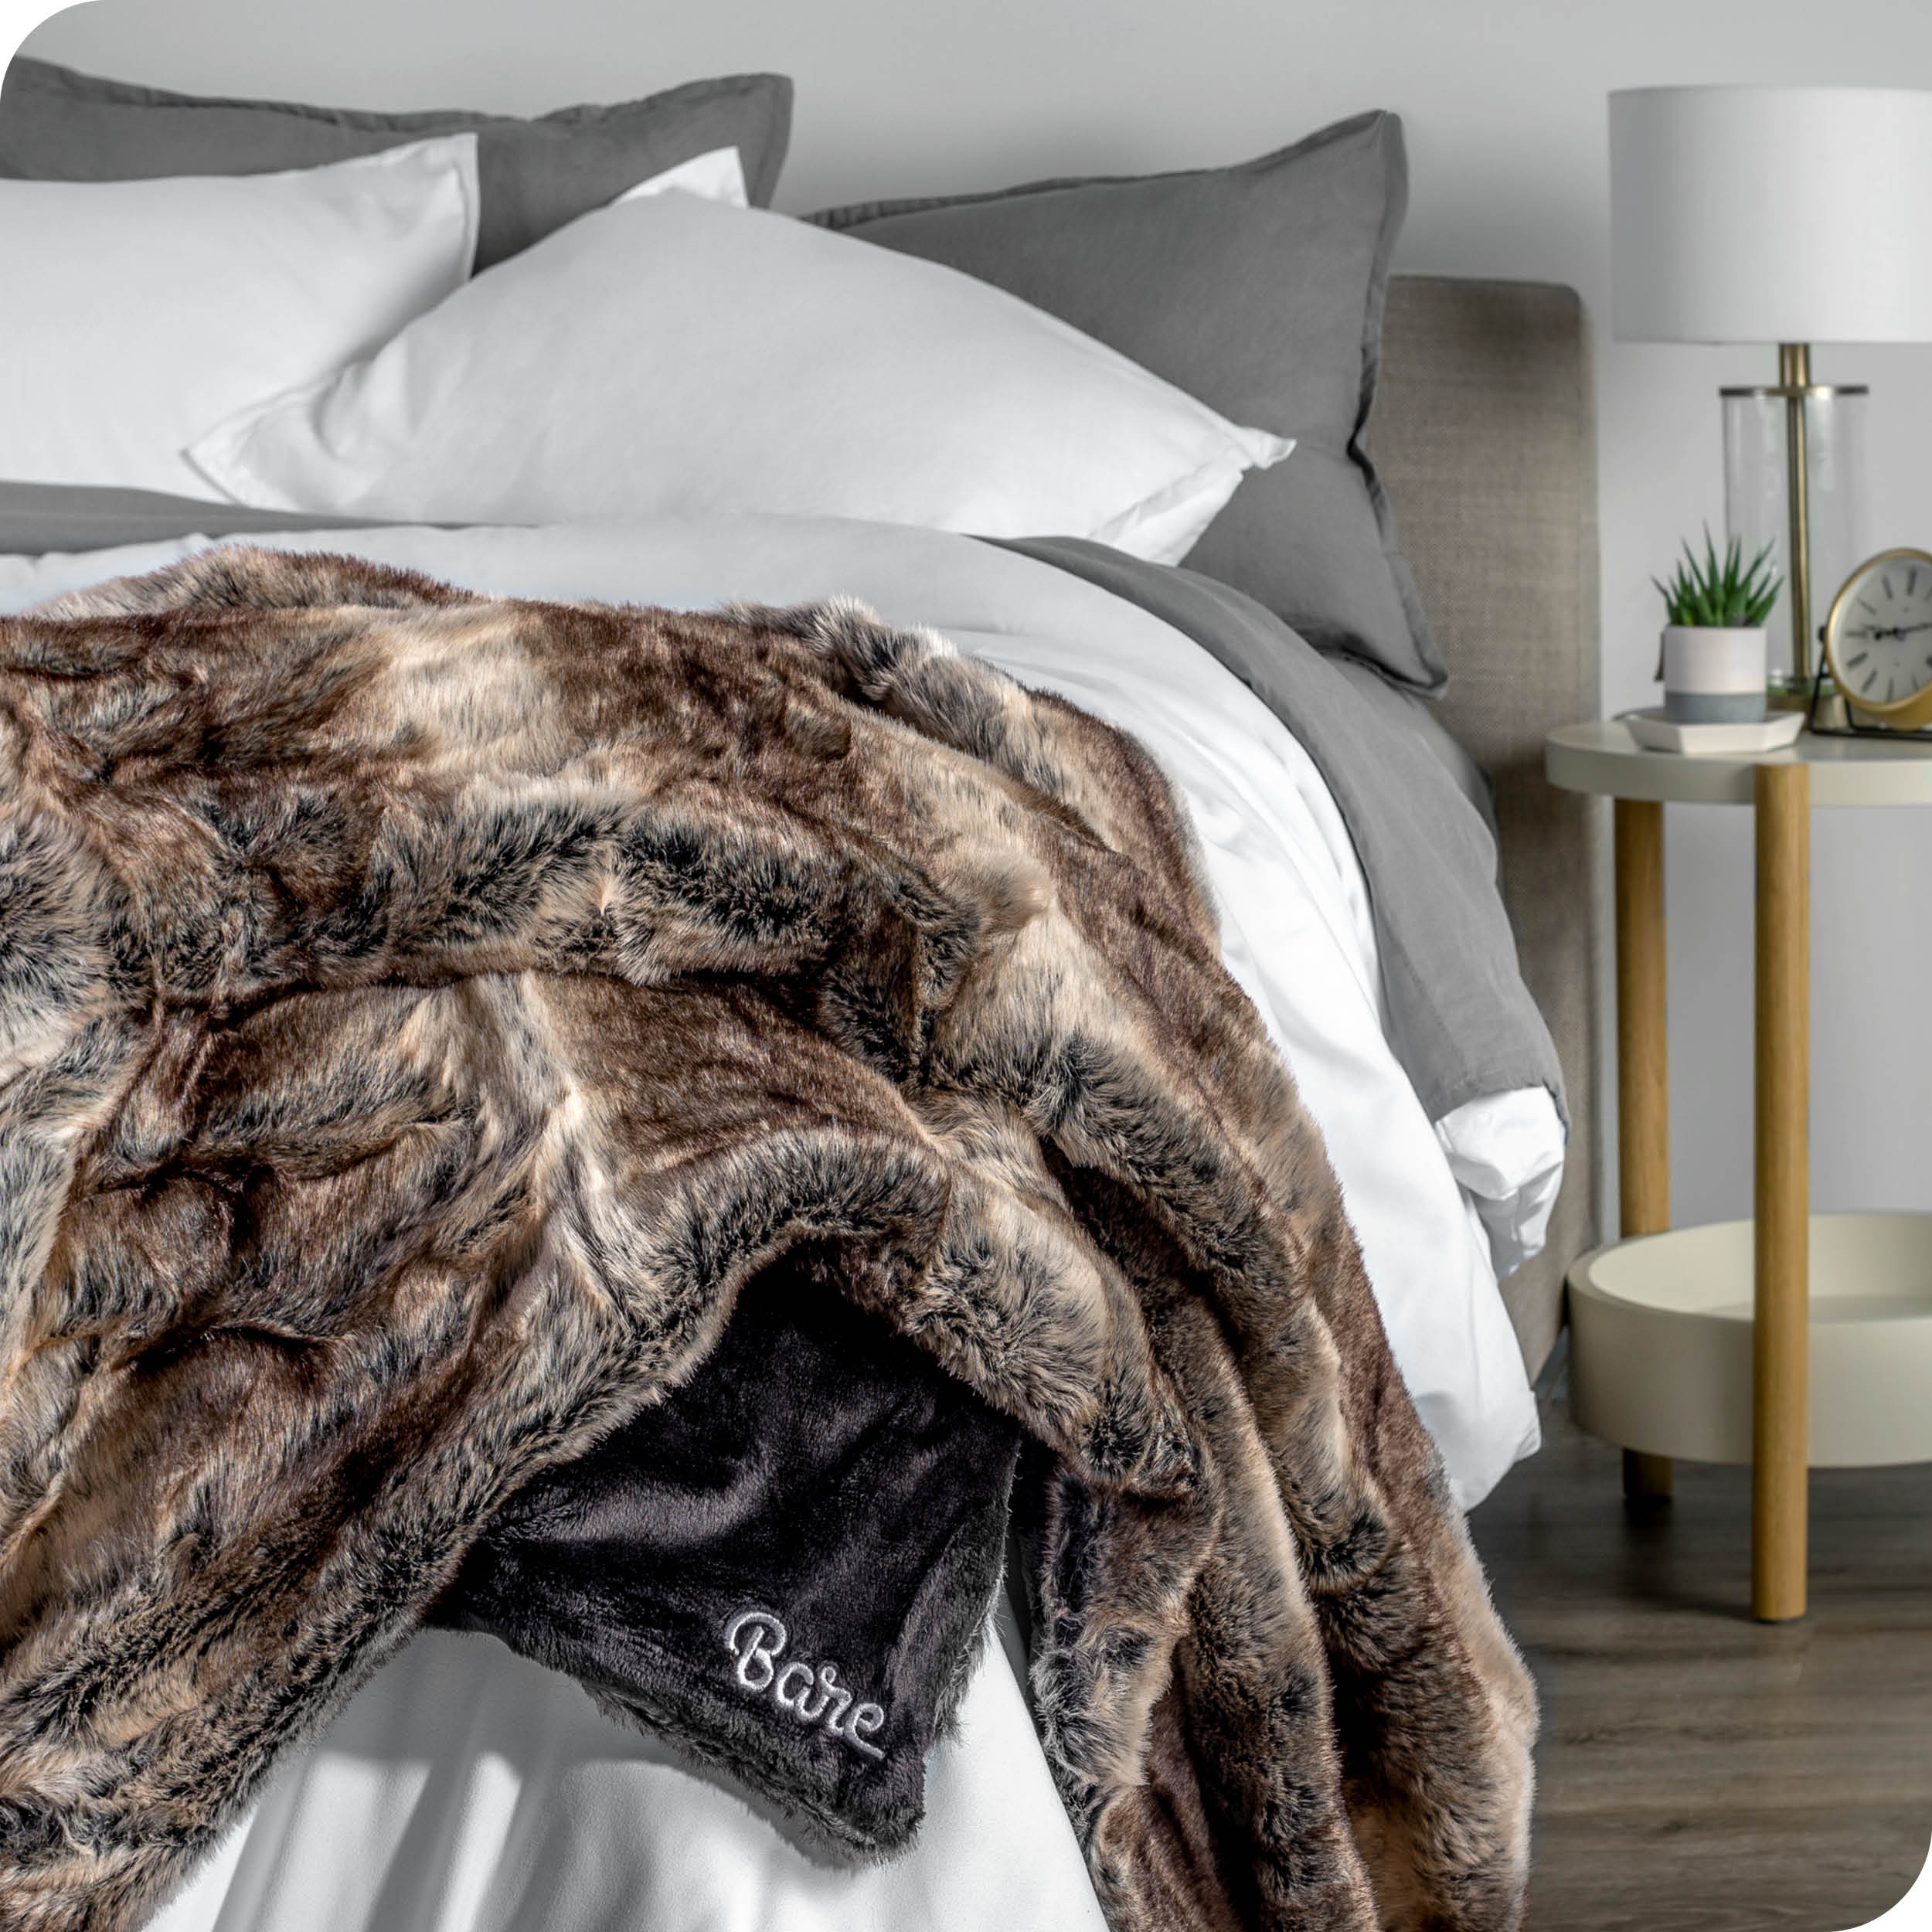 Faux fur blanket draped over the corner of a bed